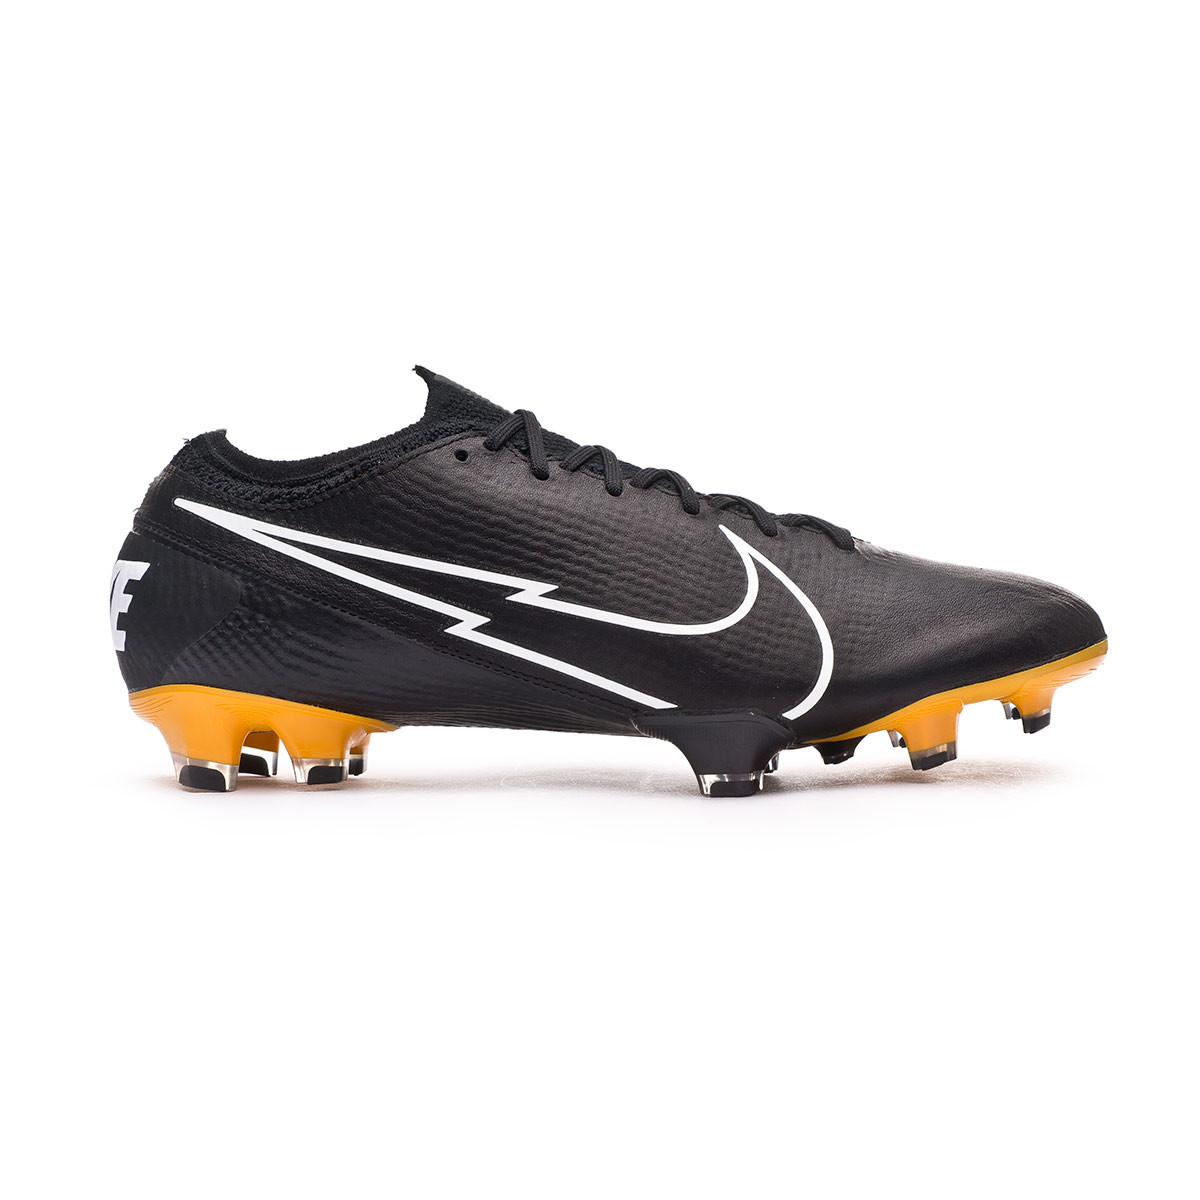 black and gold nike boots